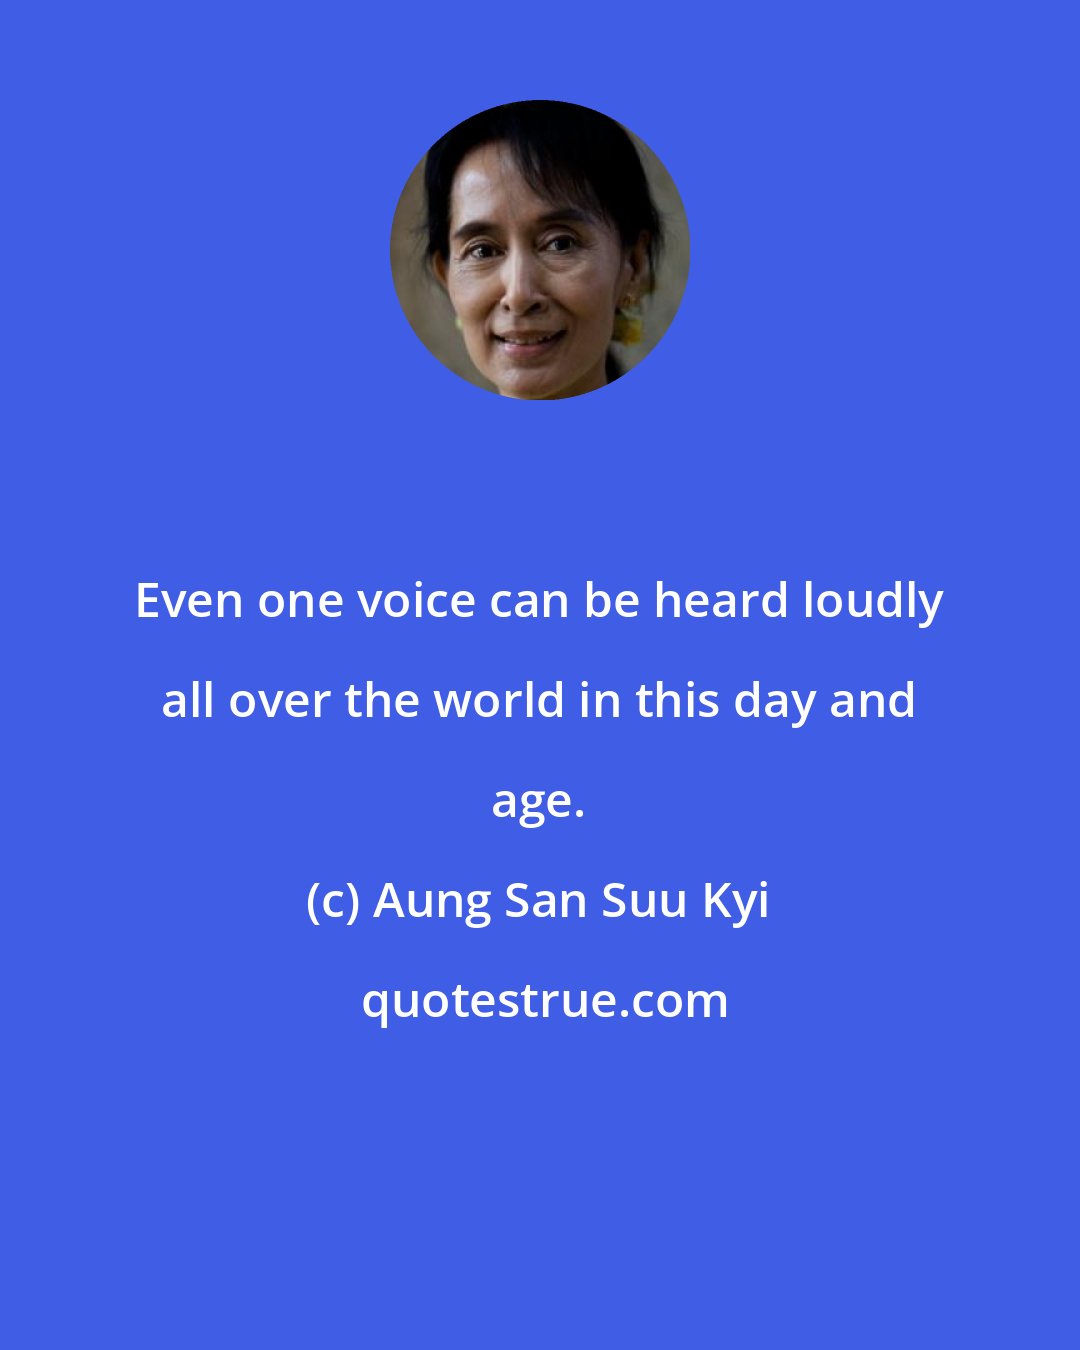 Aung San Suu Kyi: Even one voice can be heard loudly all over the world in this day and age.